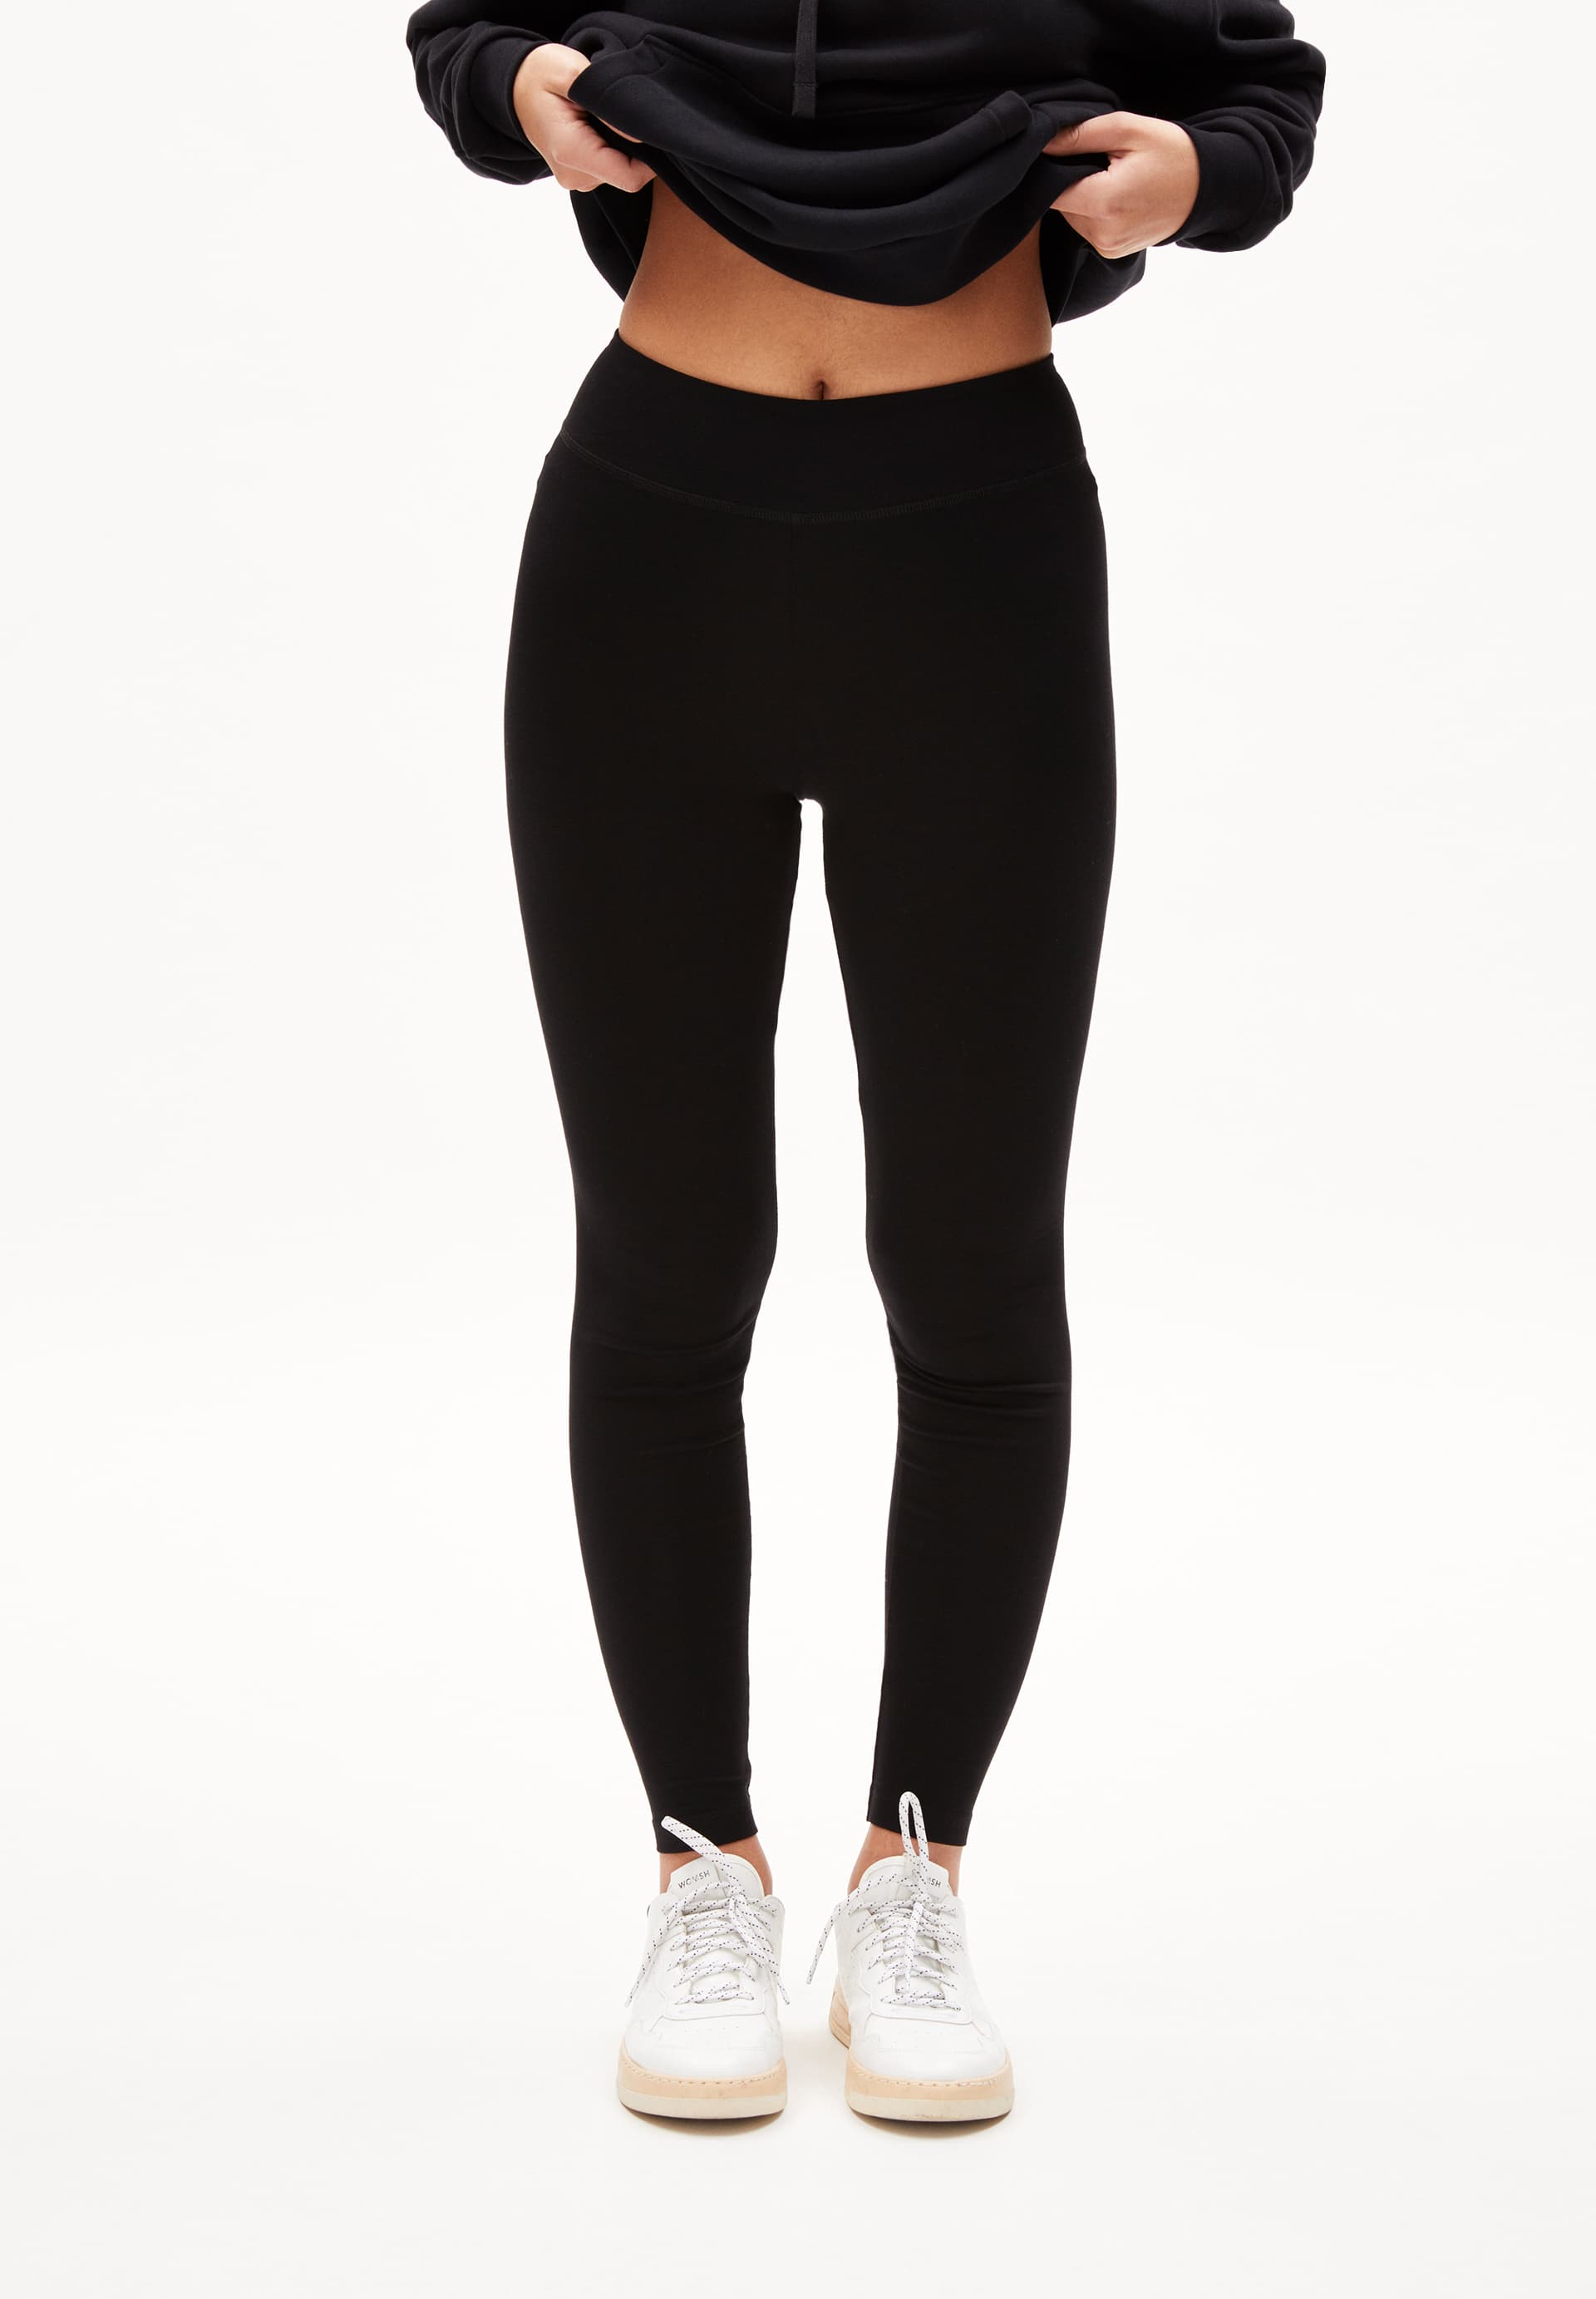 Womens Petite Topshop Leggings - Black, Black from Topshop on 21 Buttons